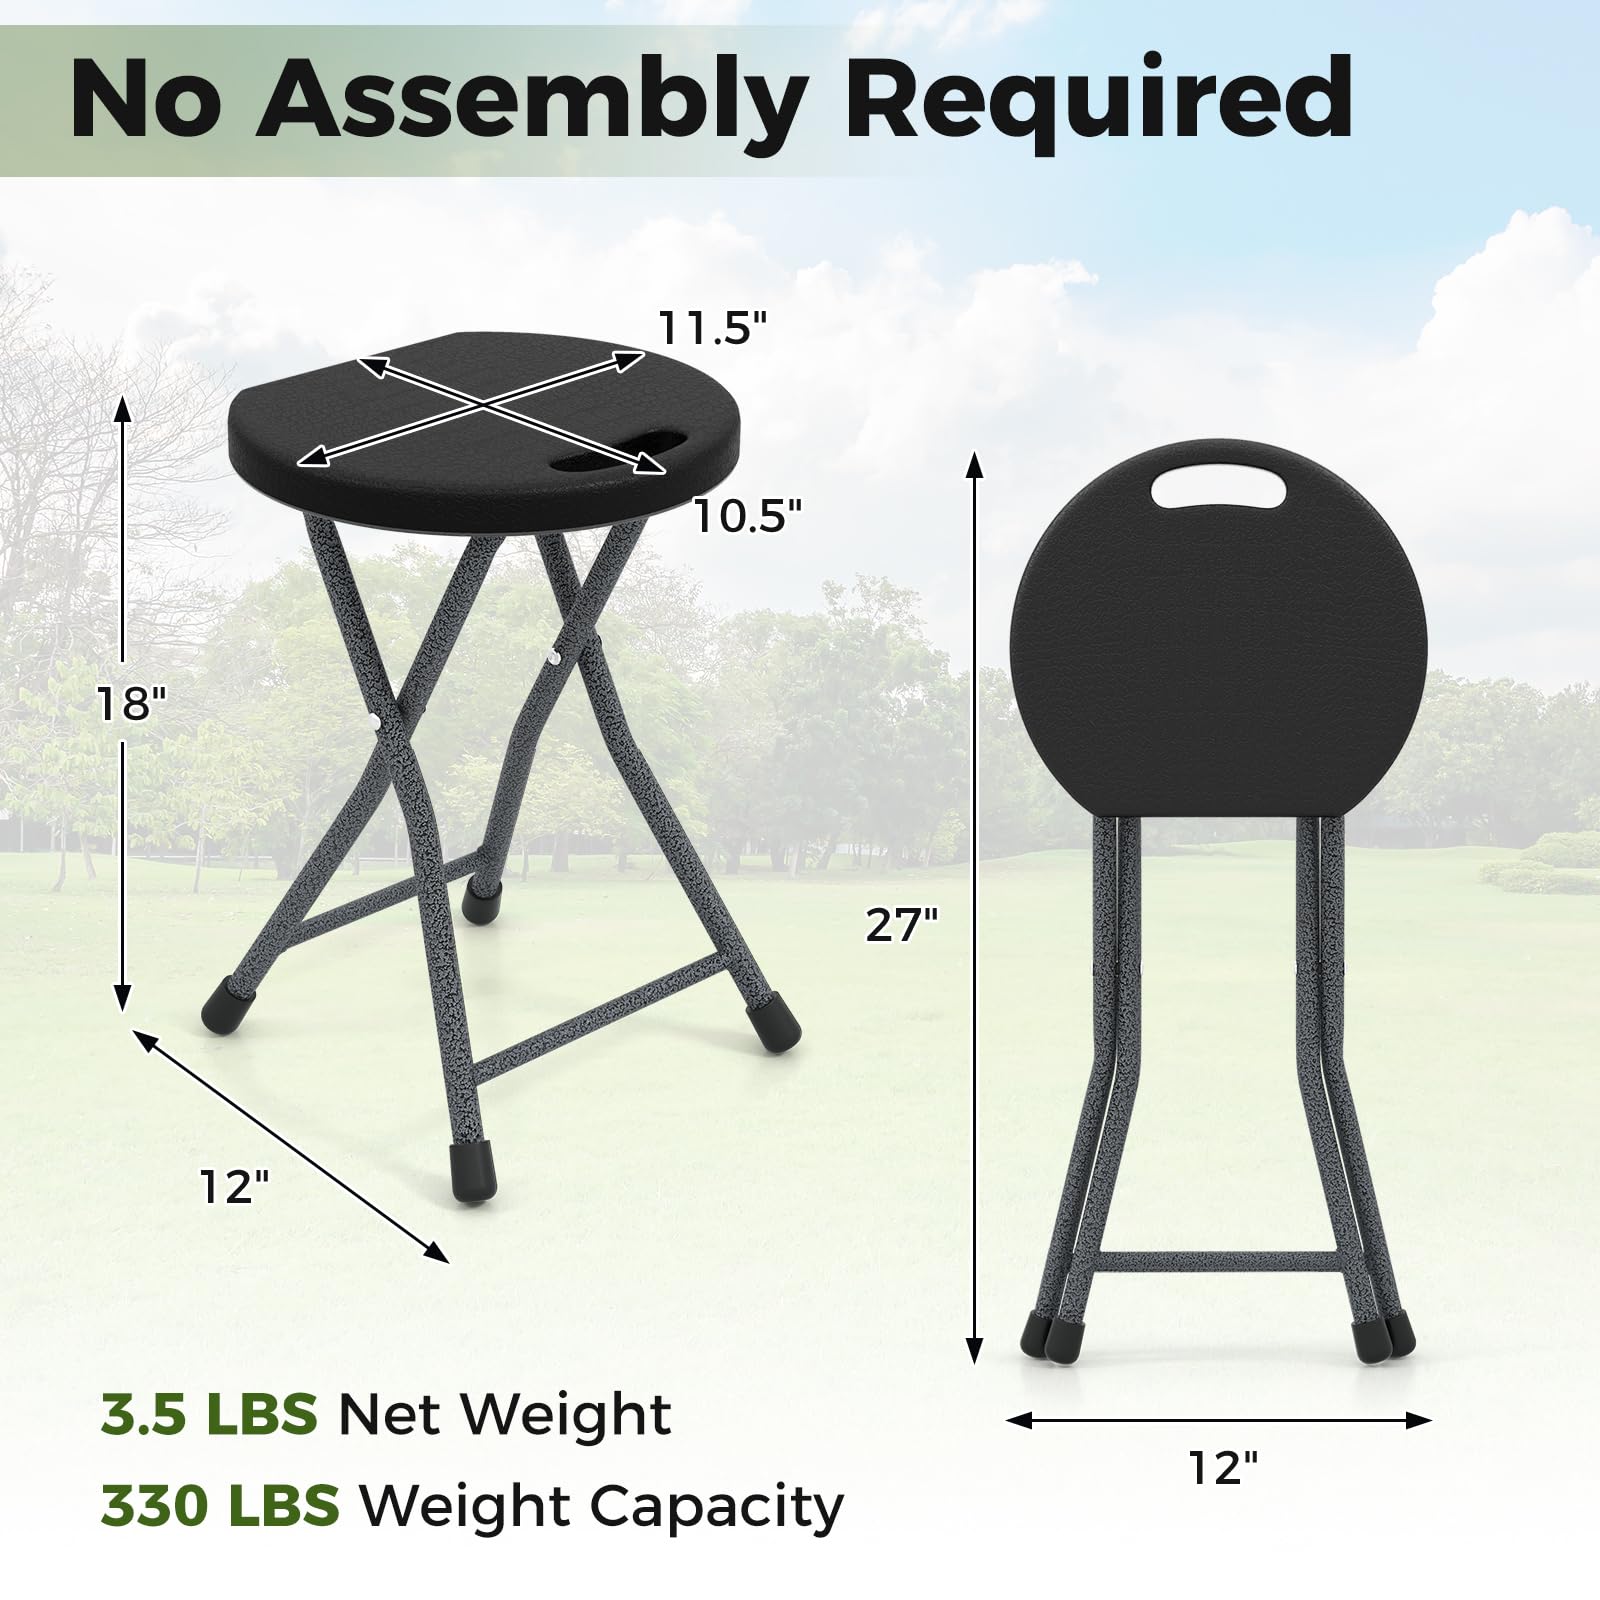 Giantex Folding Stool, 18” Height Foldable Bar Stools, Portable Folding Chairs with Built-in Carry Handle